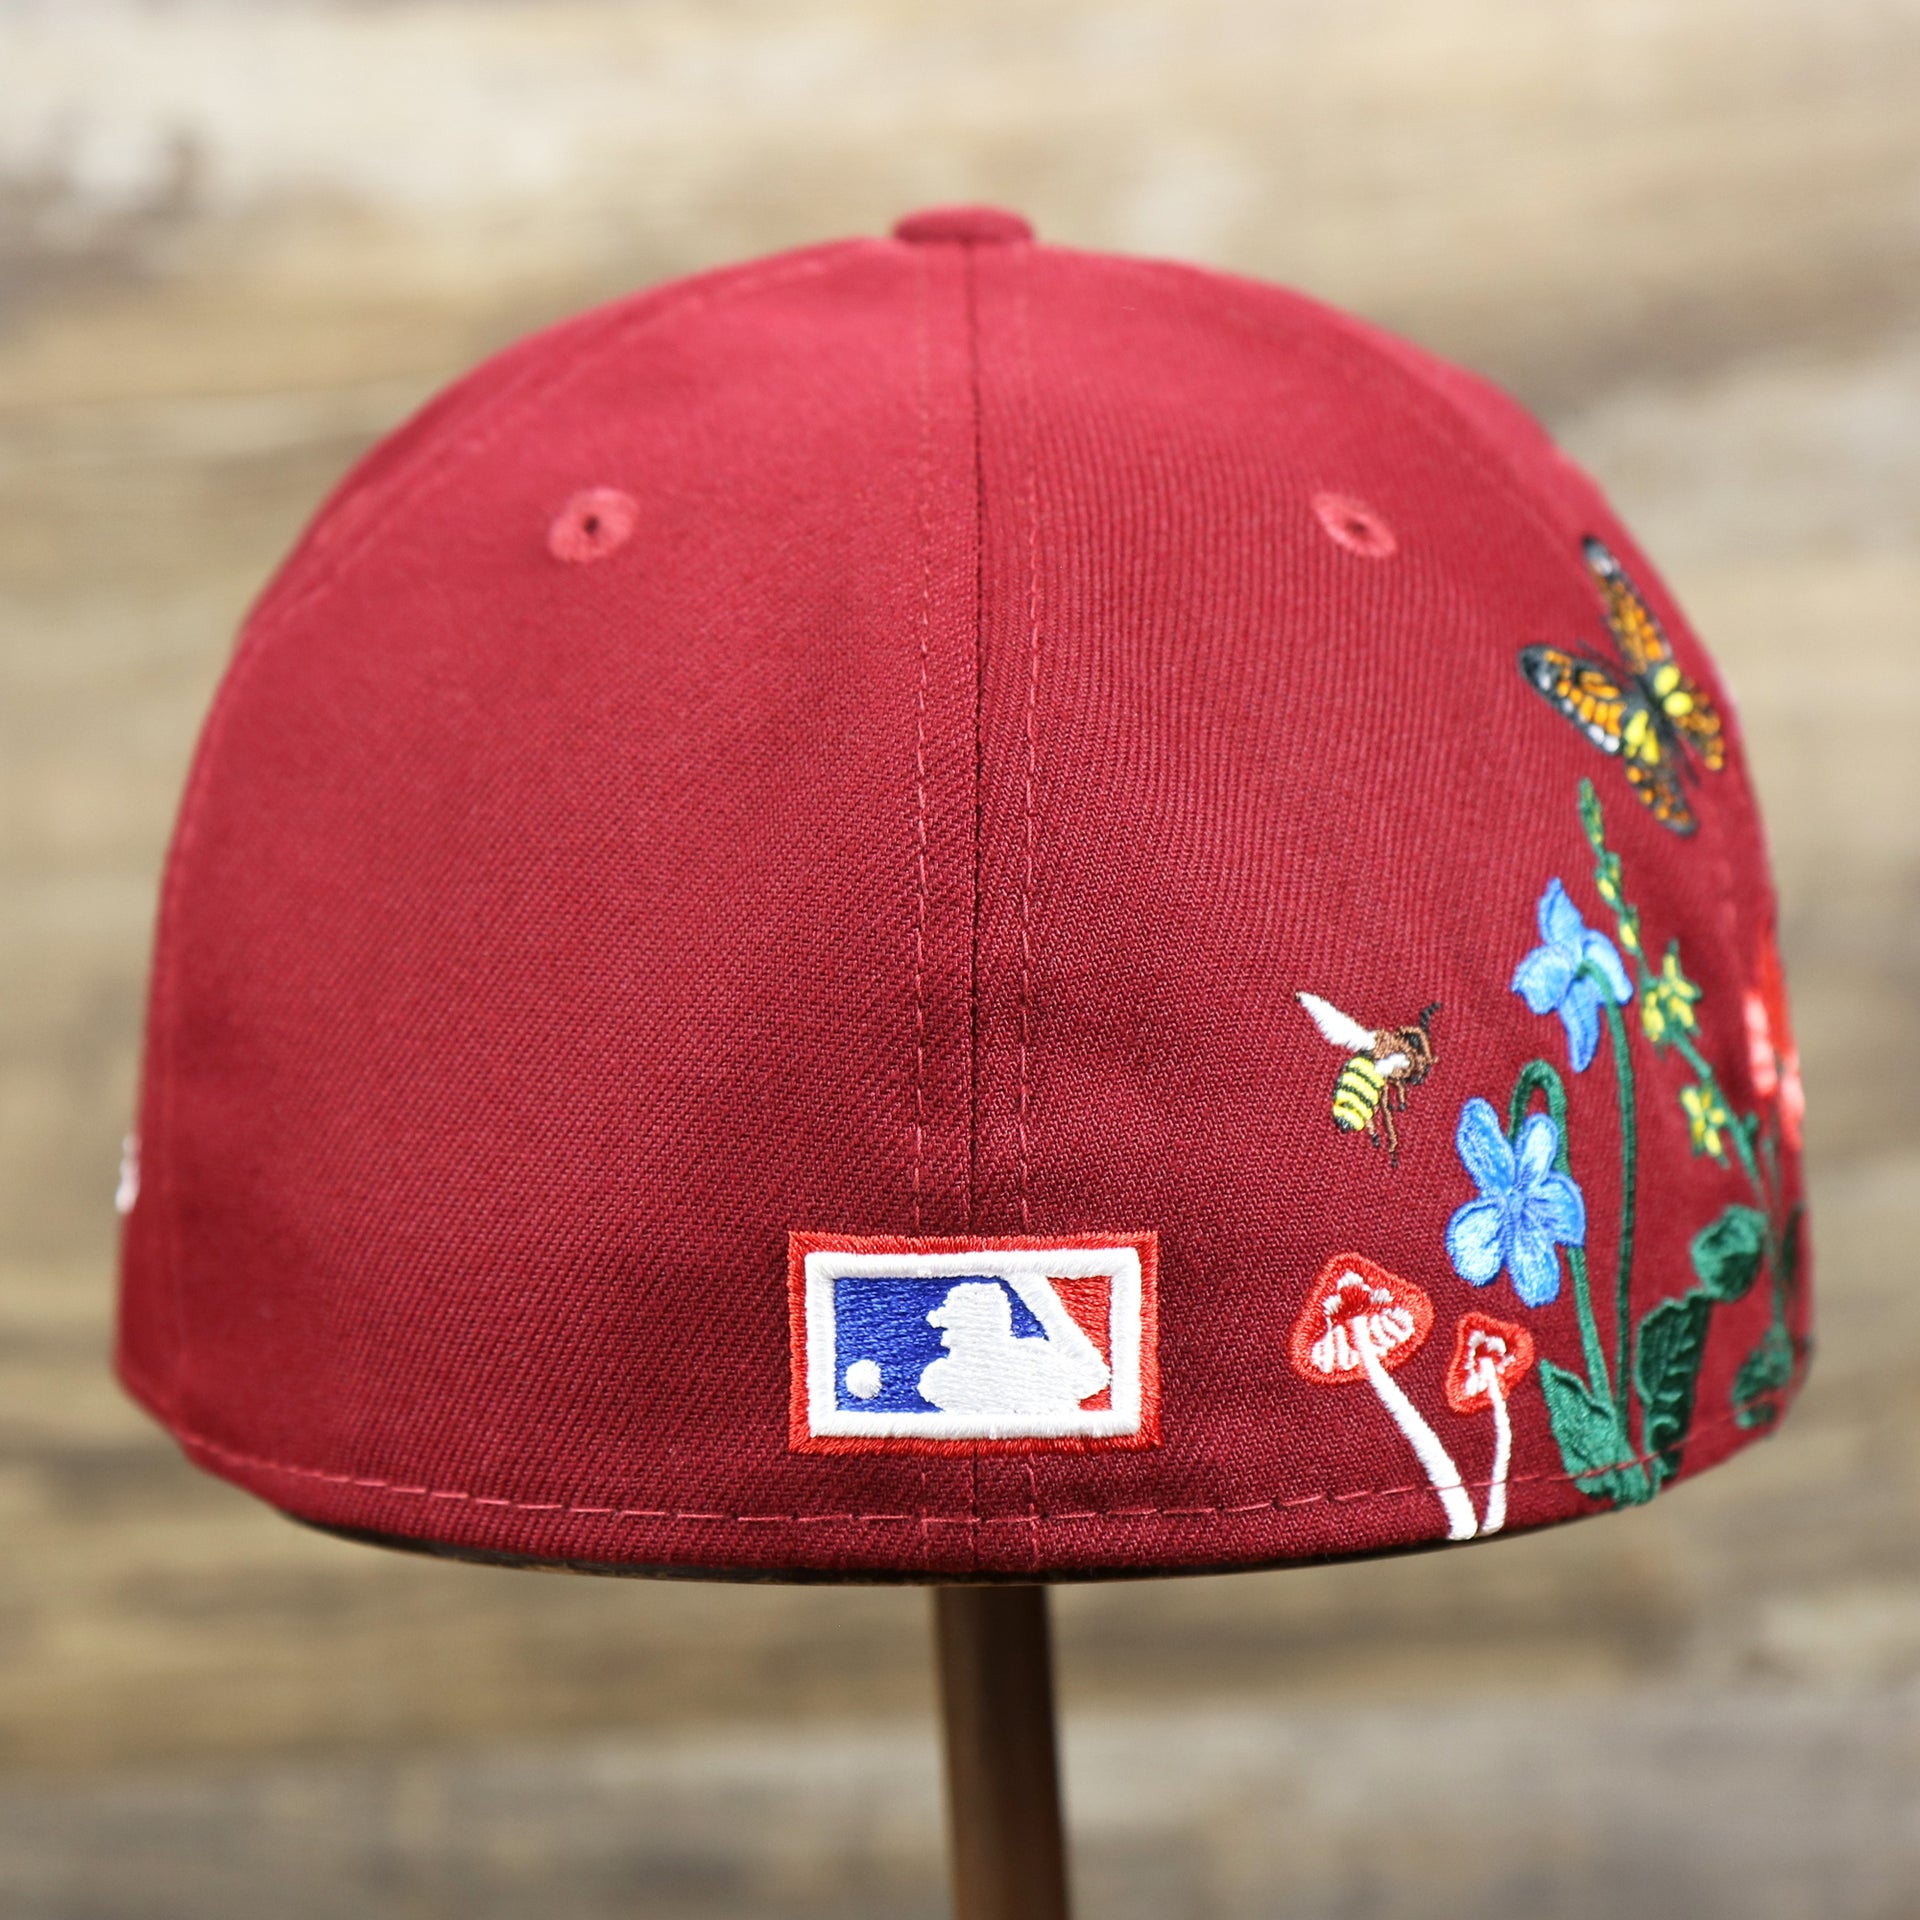 The backside of the Cooperstown Philadelphia Phillies Gray Bottom Bloom Spring Embroidery 59Fifty Fitted Cap | Maroon 59Fifty Cap